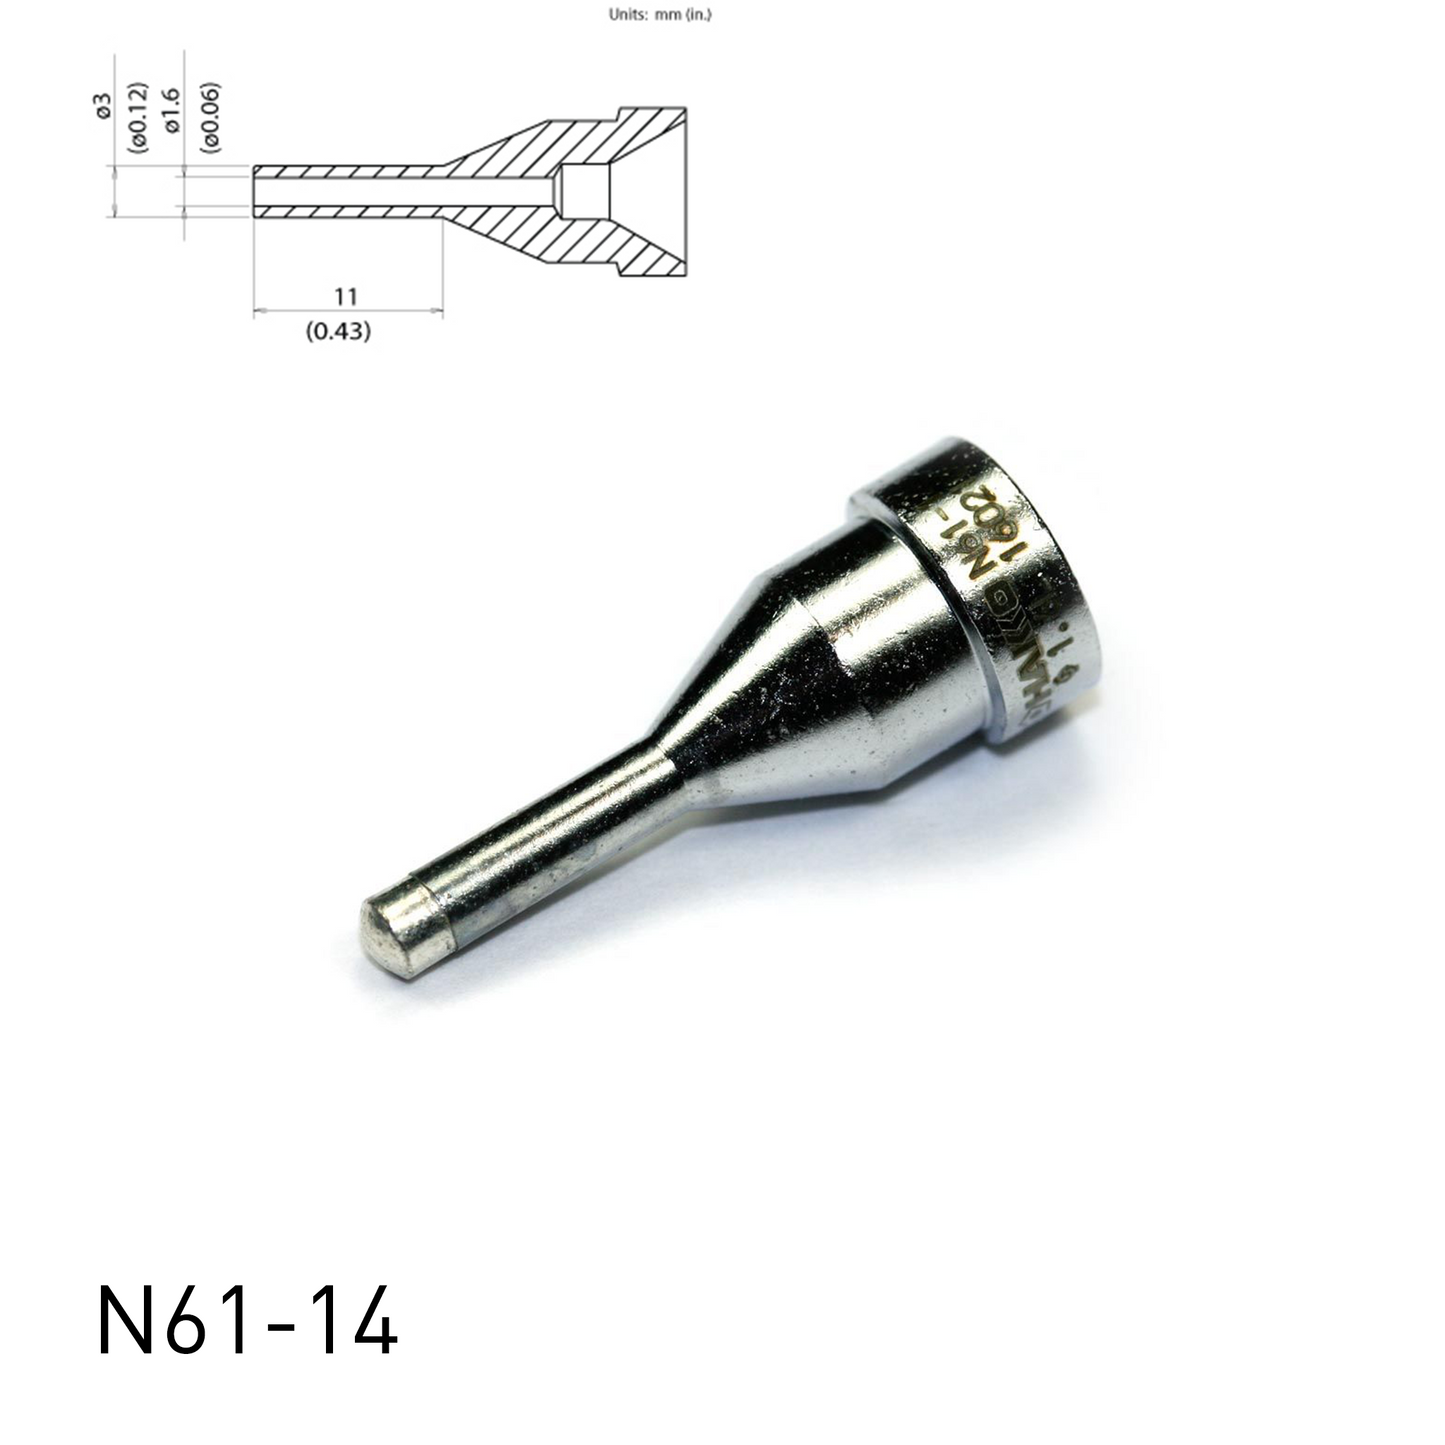 N61-14 Nozzle 1.6 mm Extra Long